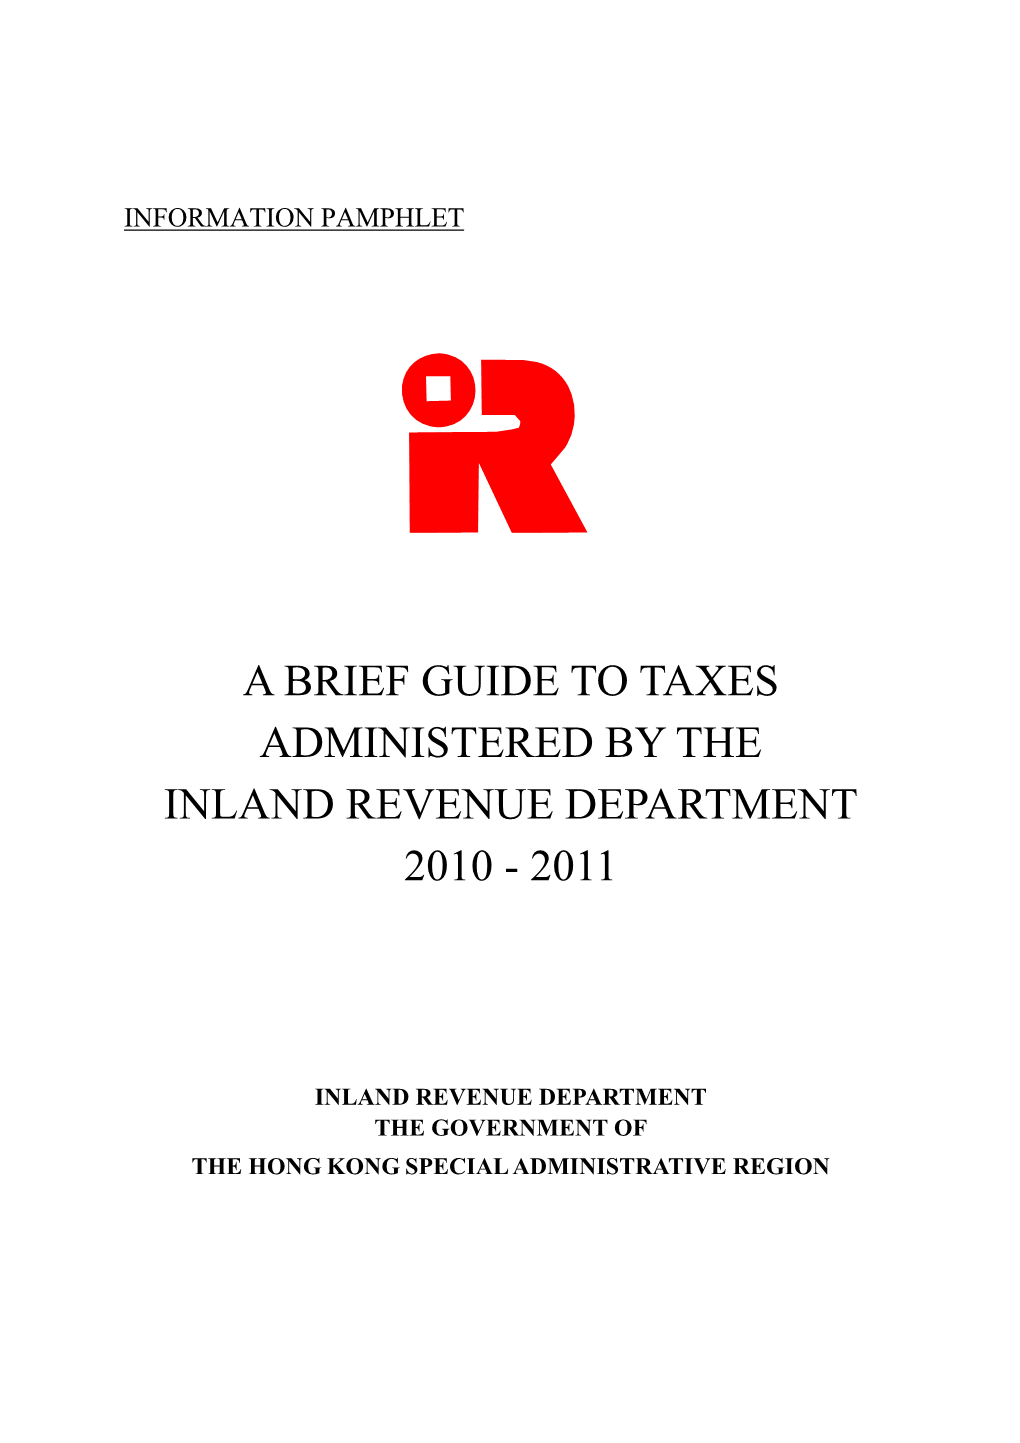 A Brief Guide to Taxes Administered by the Inland Revenue Department 2010 - 2011